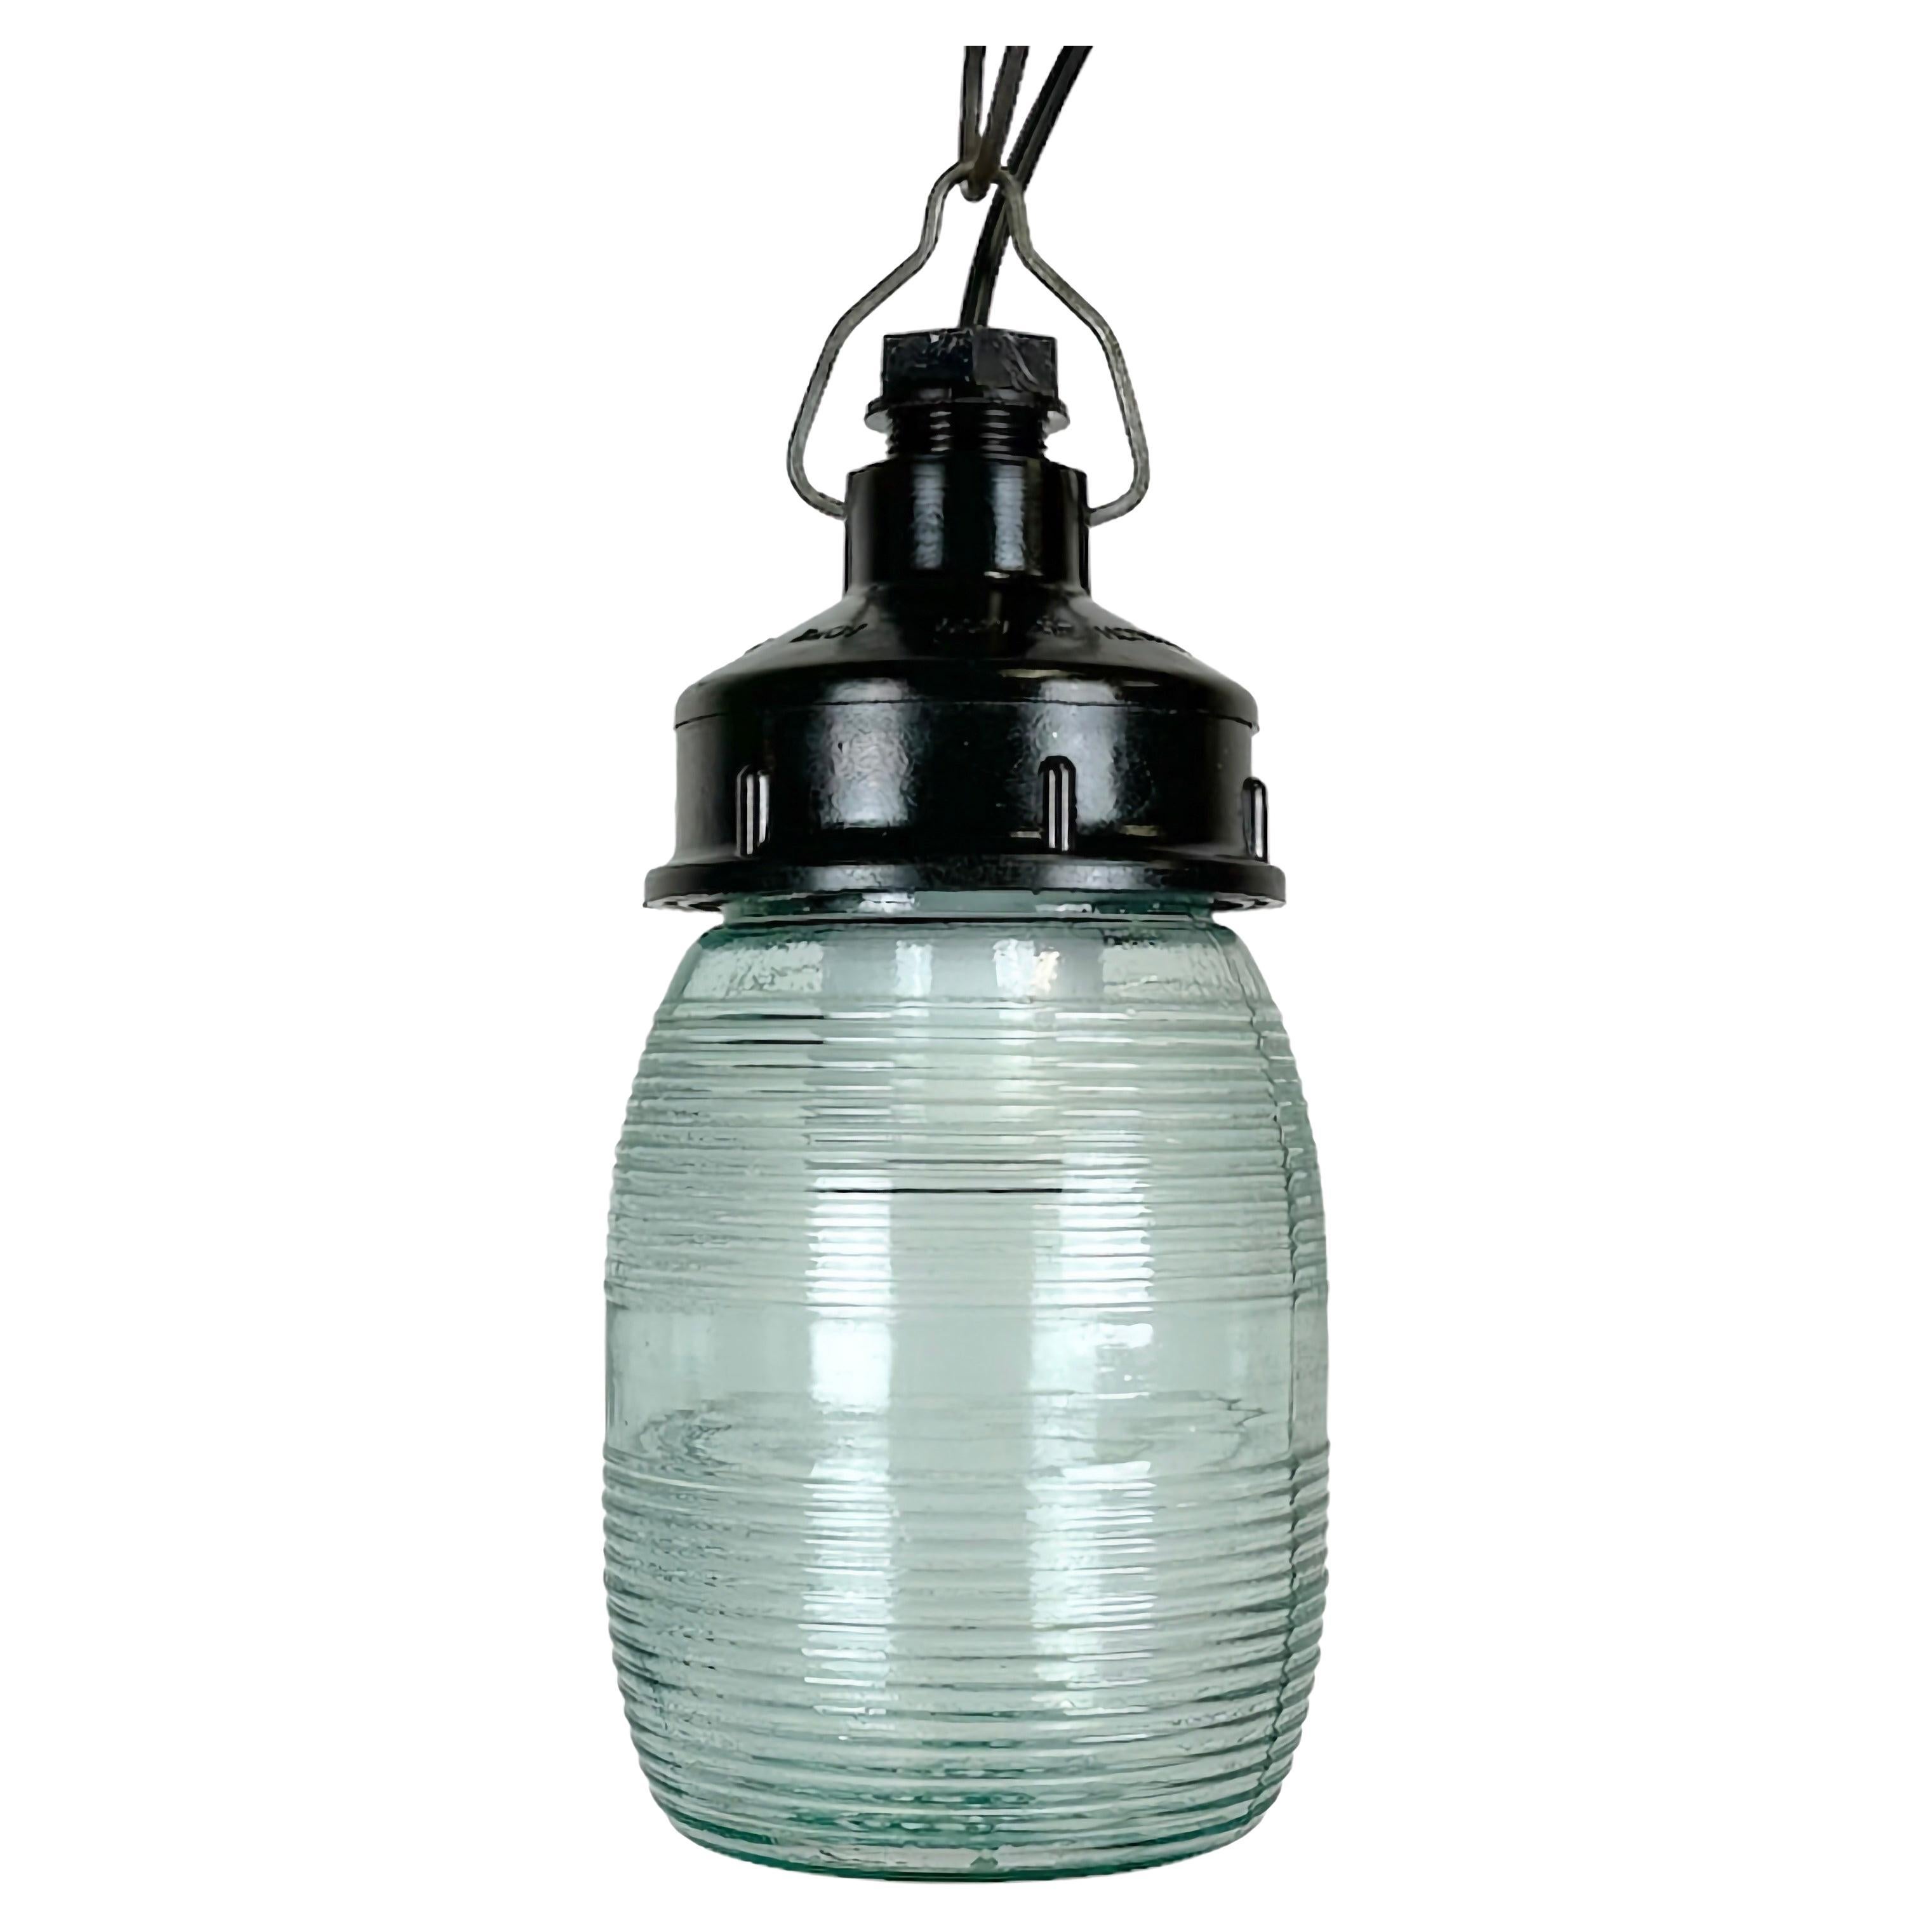 Industrial Bakelite Pendant Light with Ribbed Glass, 1970s